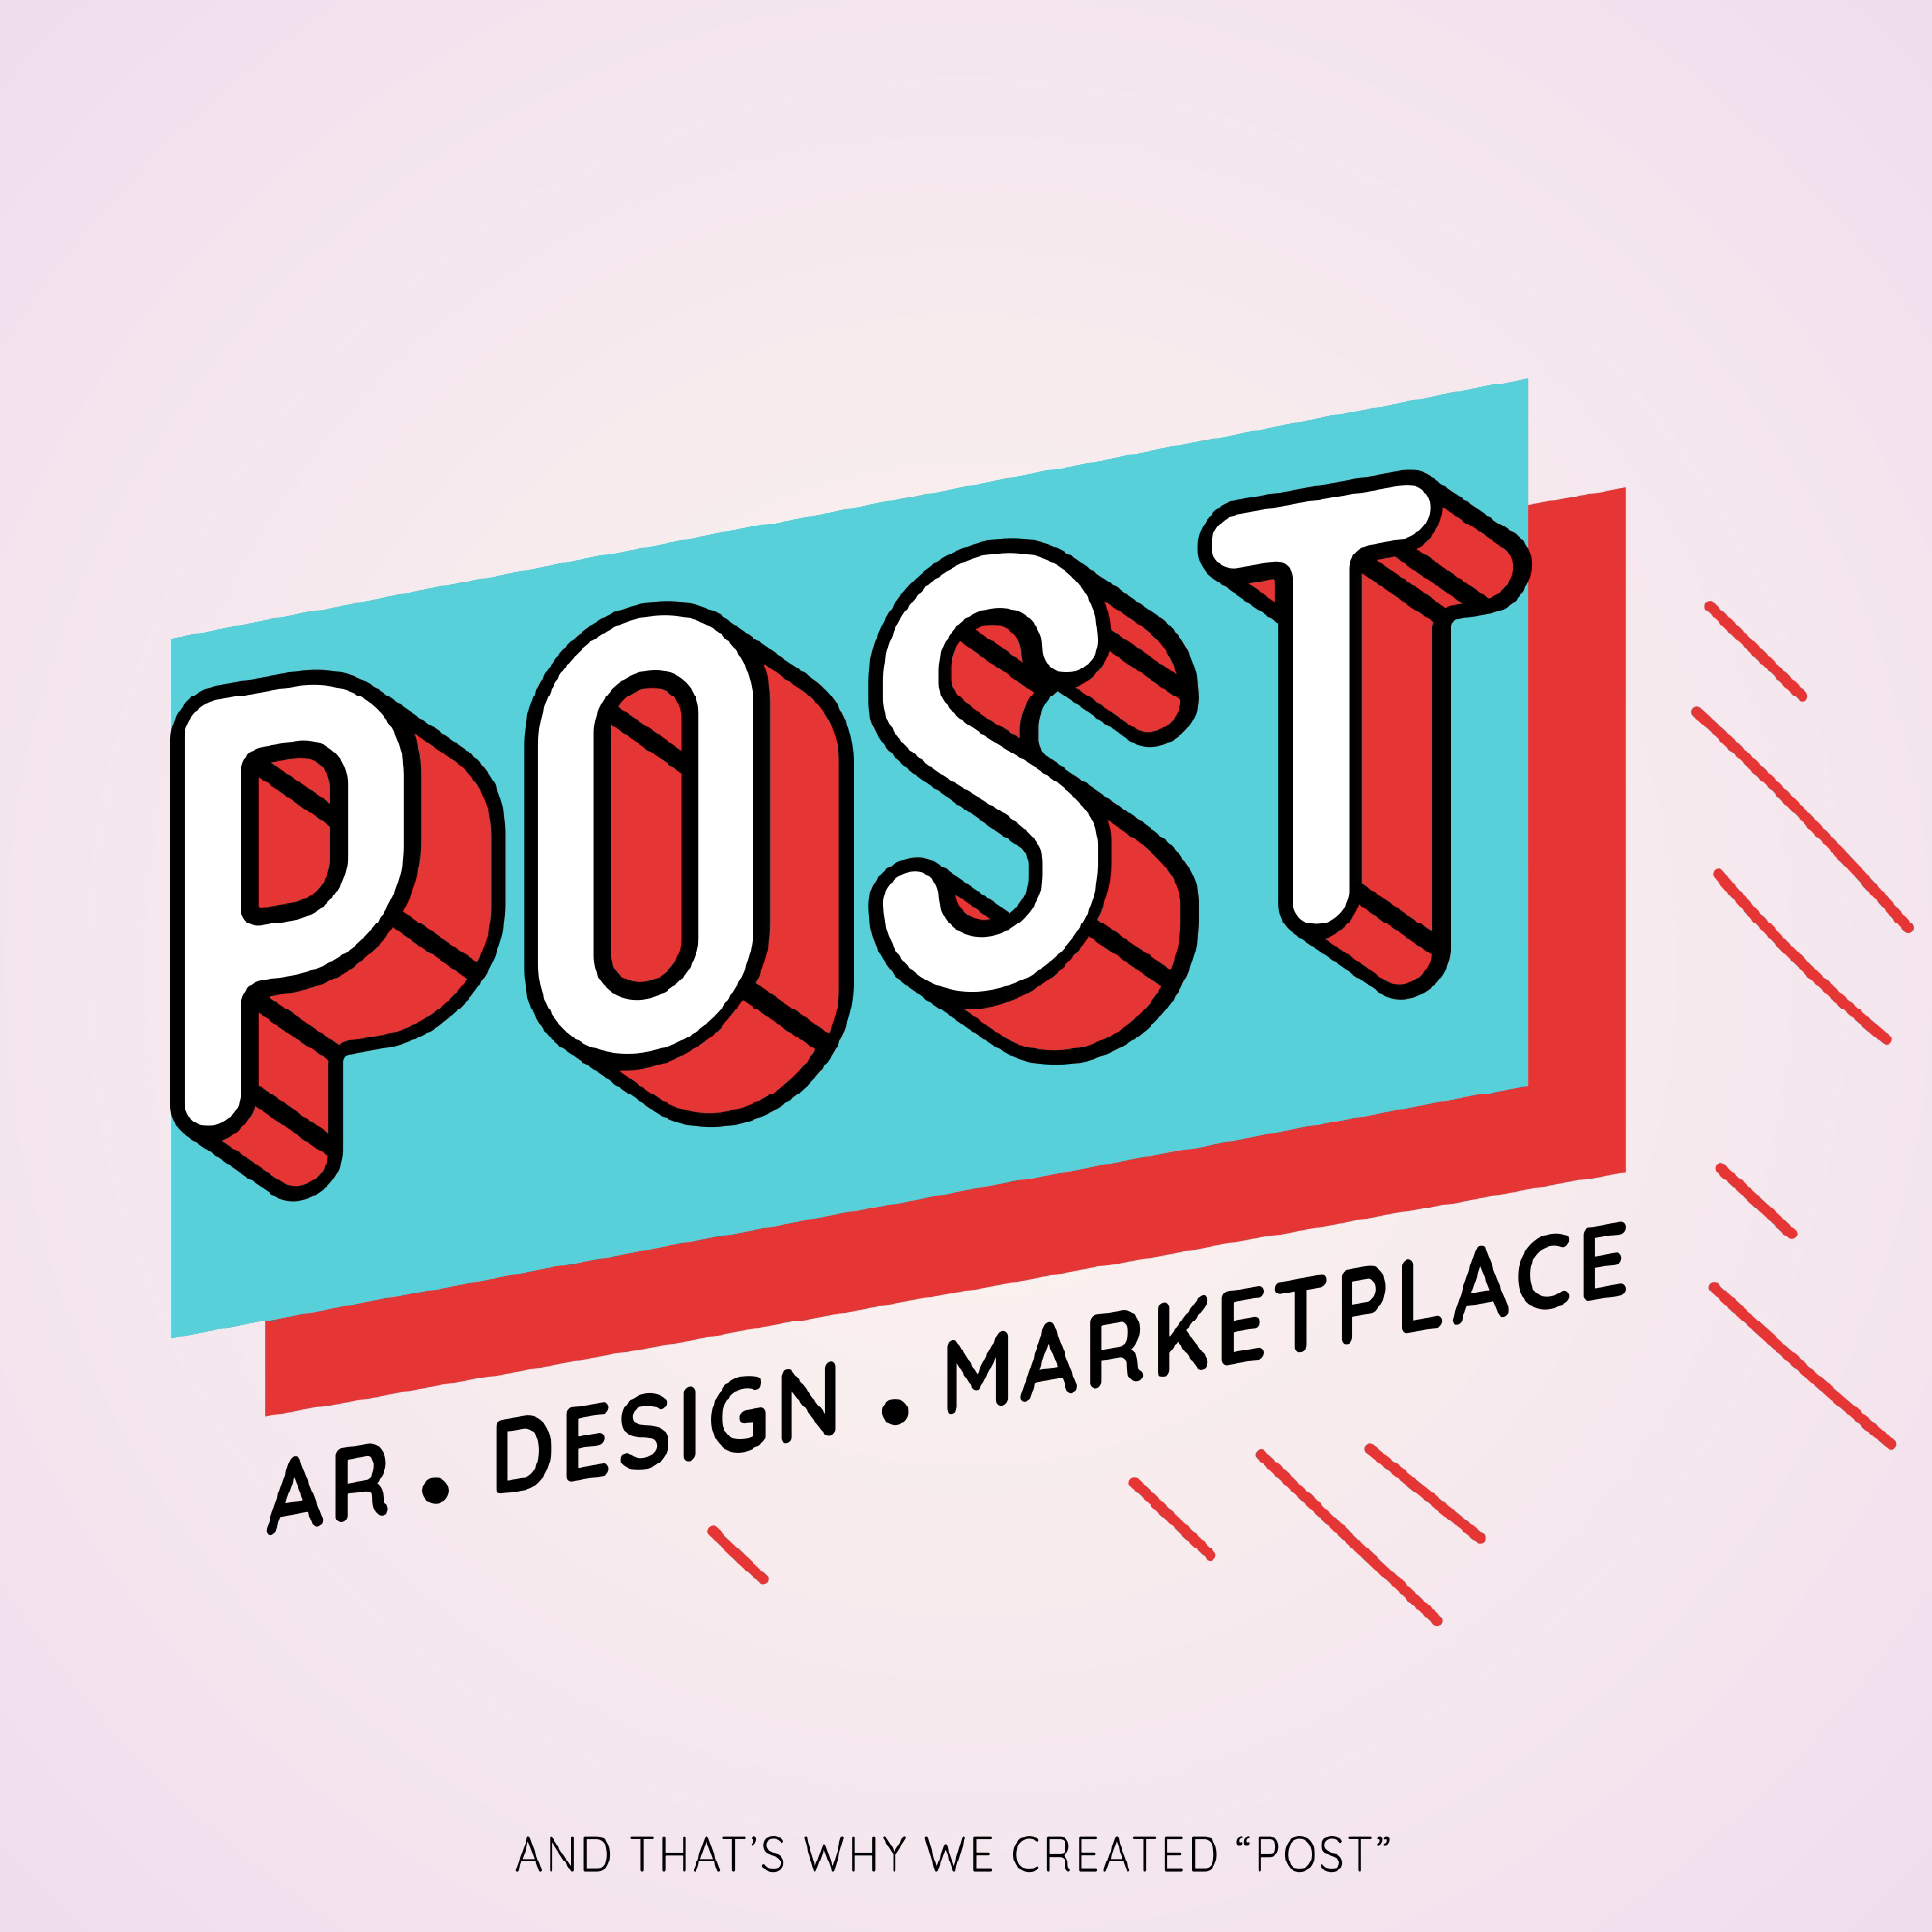 Page Internationale is proud to Launch Post App Crowdfunding Campaign on Wednesday, December 23rd 2020. Post, AR Design Marketplace.